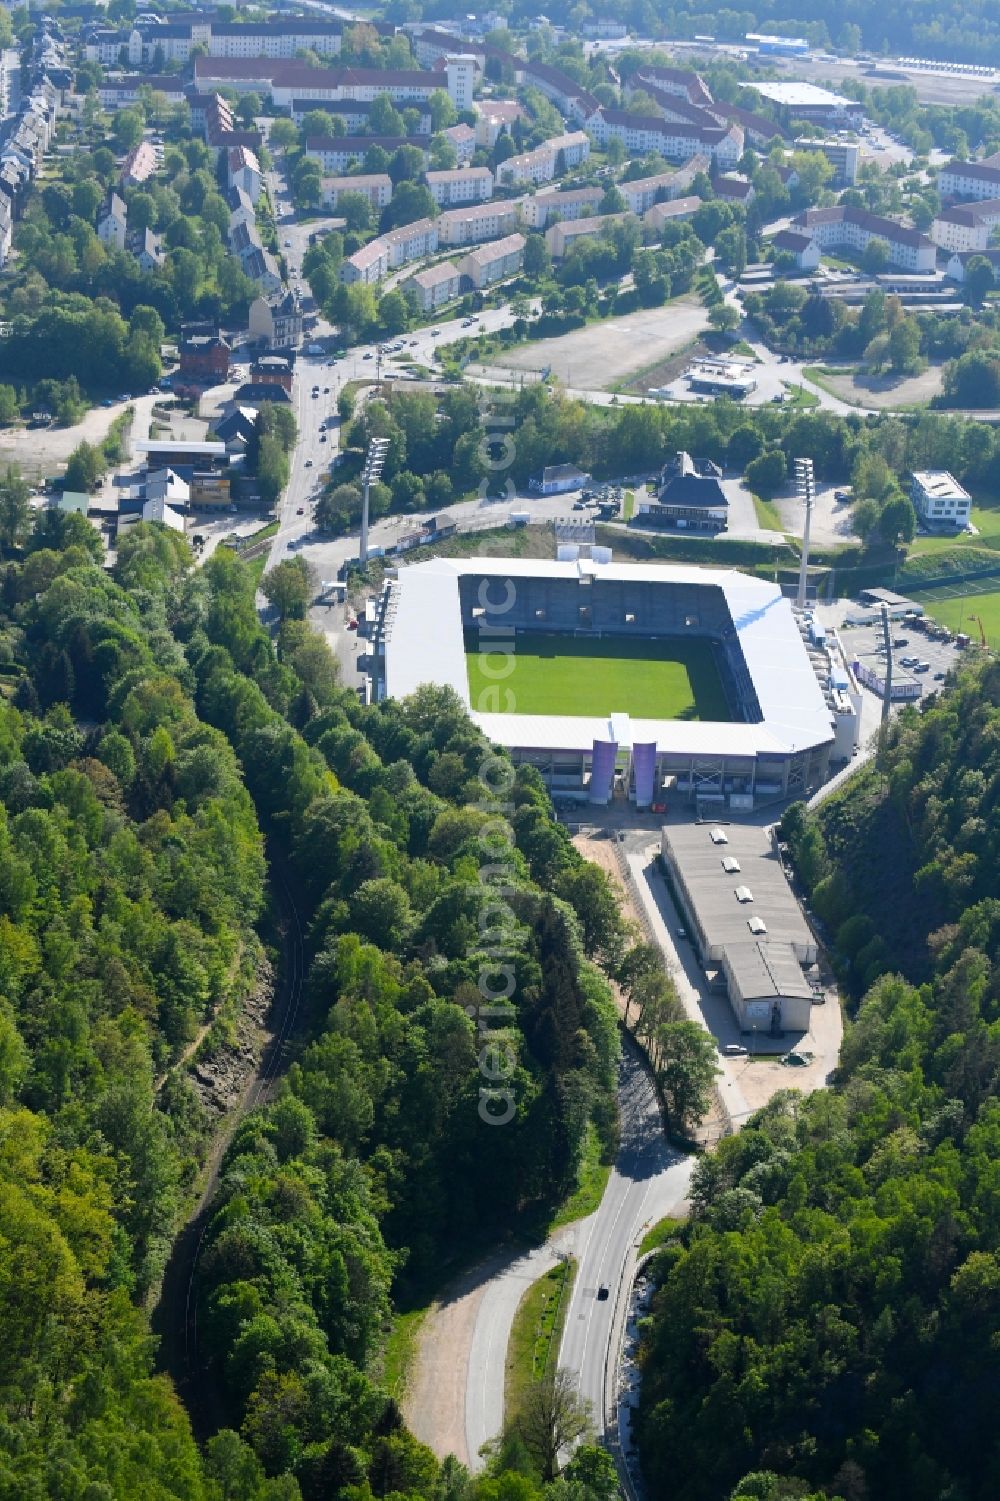 Aerial image Aue - Sports facility grounds of the Arena stadium Erzgebirgsstadion on Loessnitzer Strasse in Aue in the state Saxony, Germany